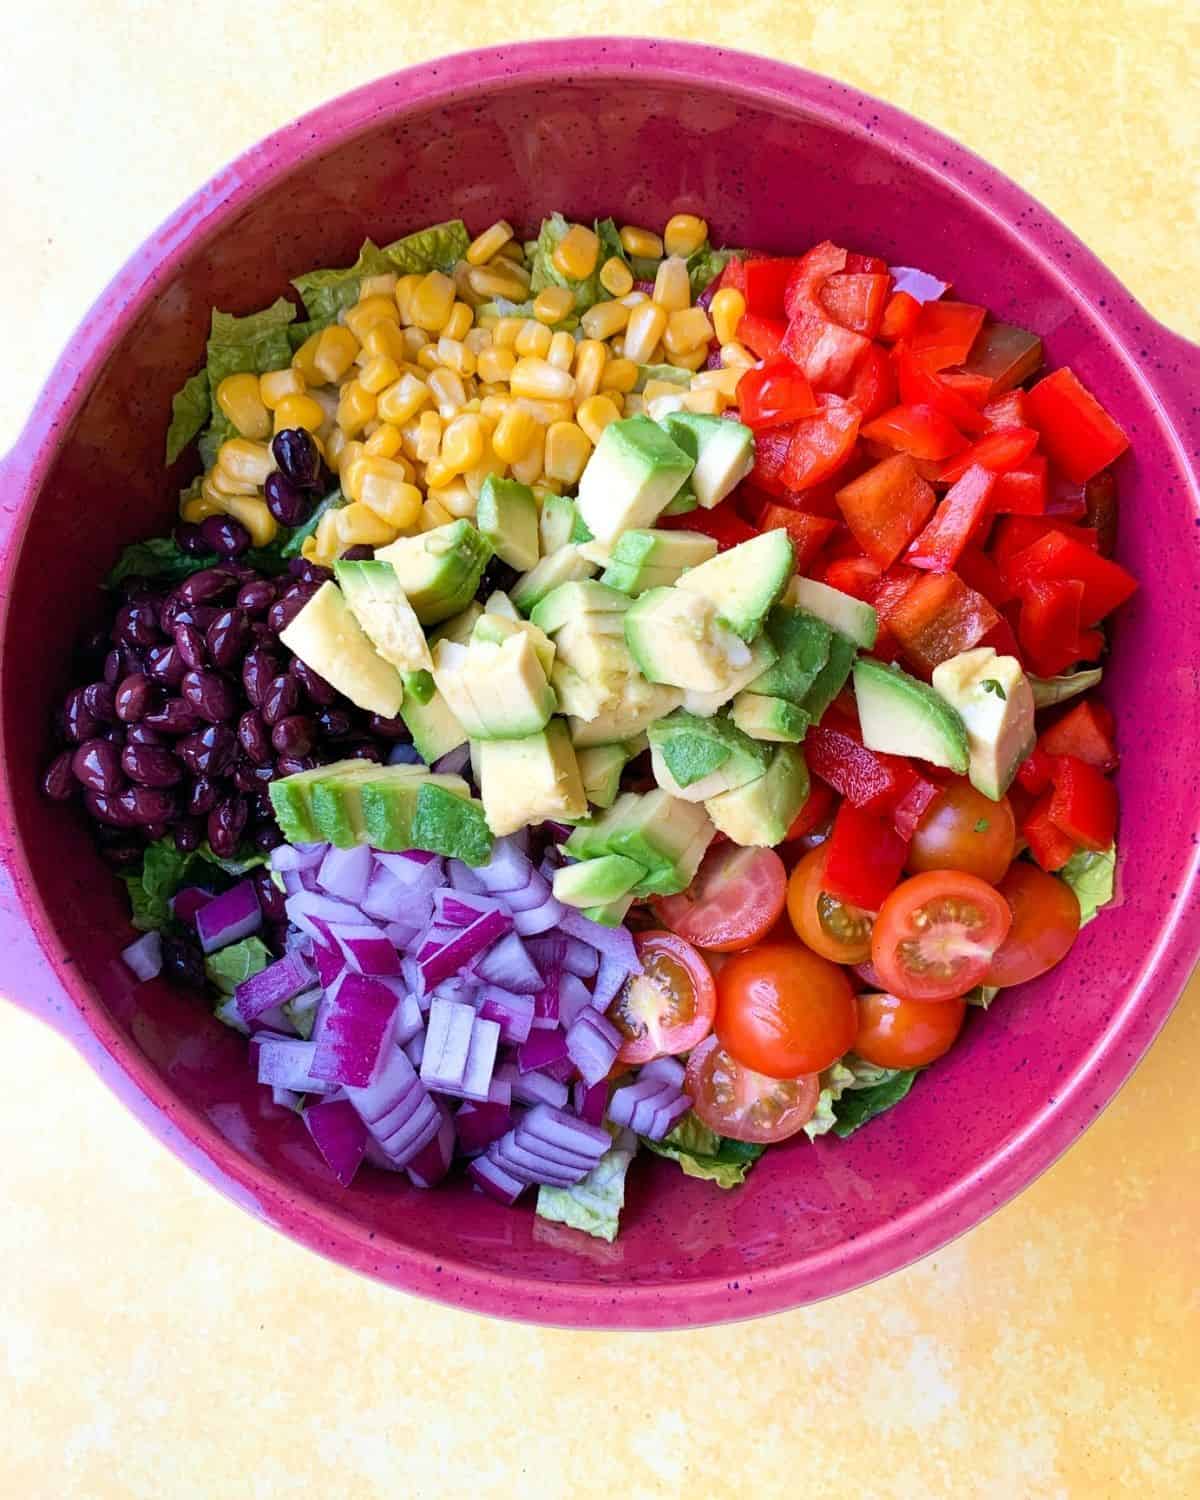 Chopped salad ingredients in a bowl.